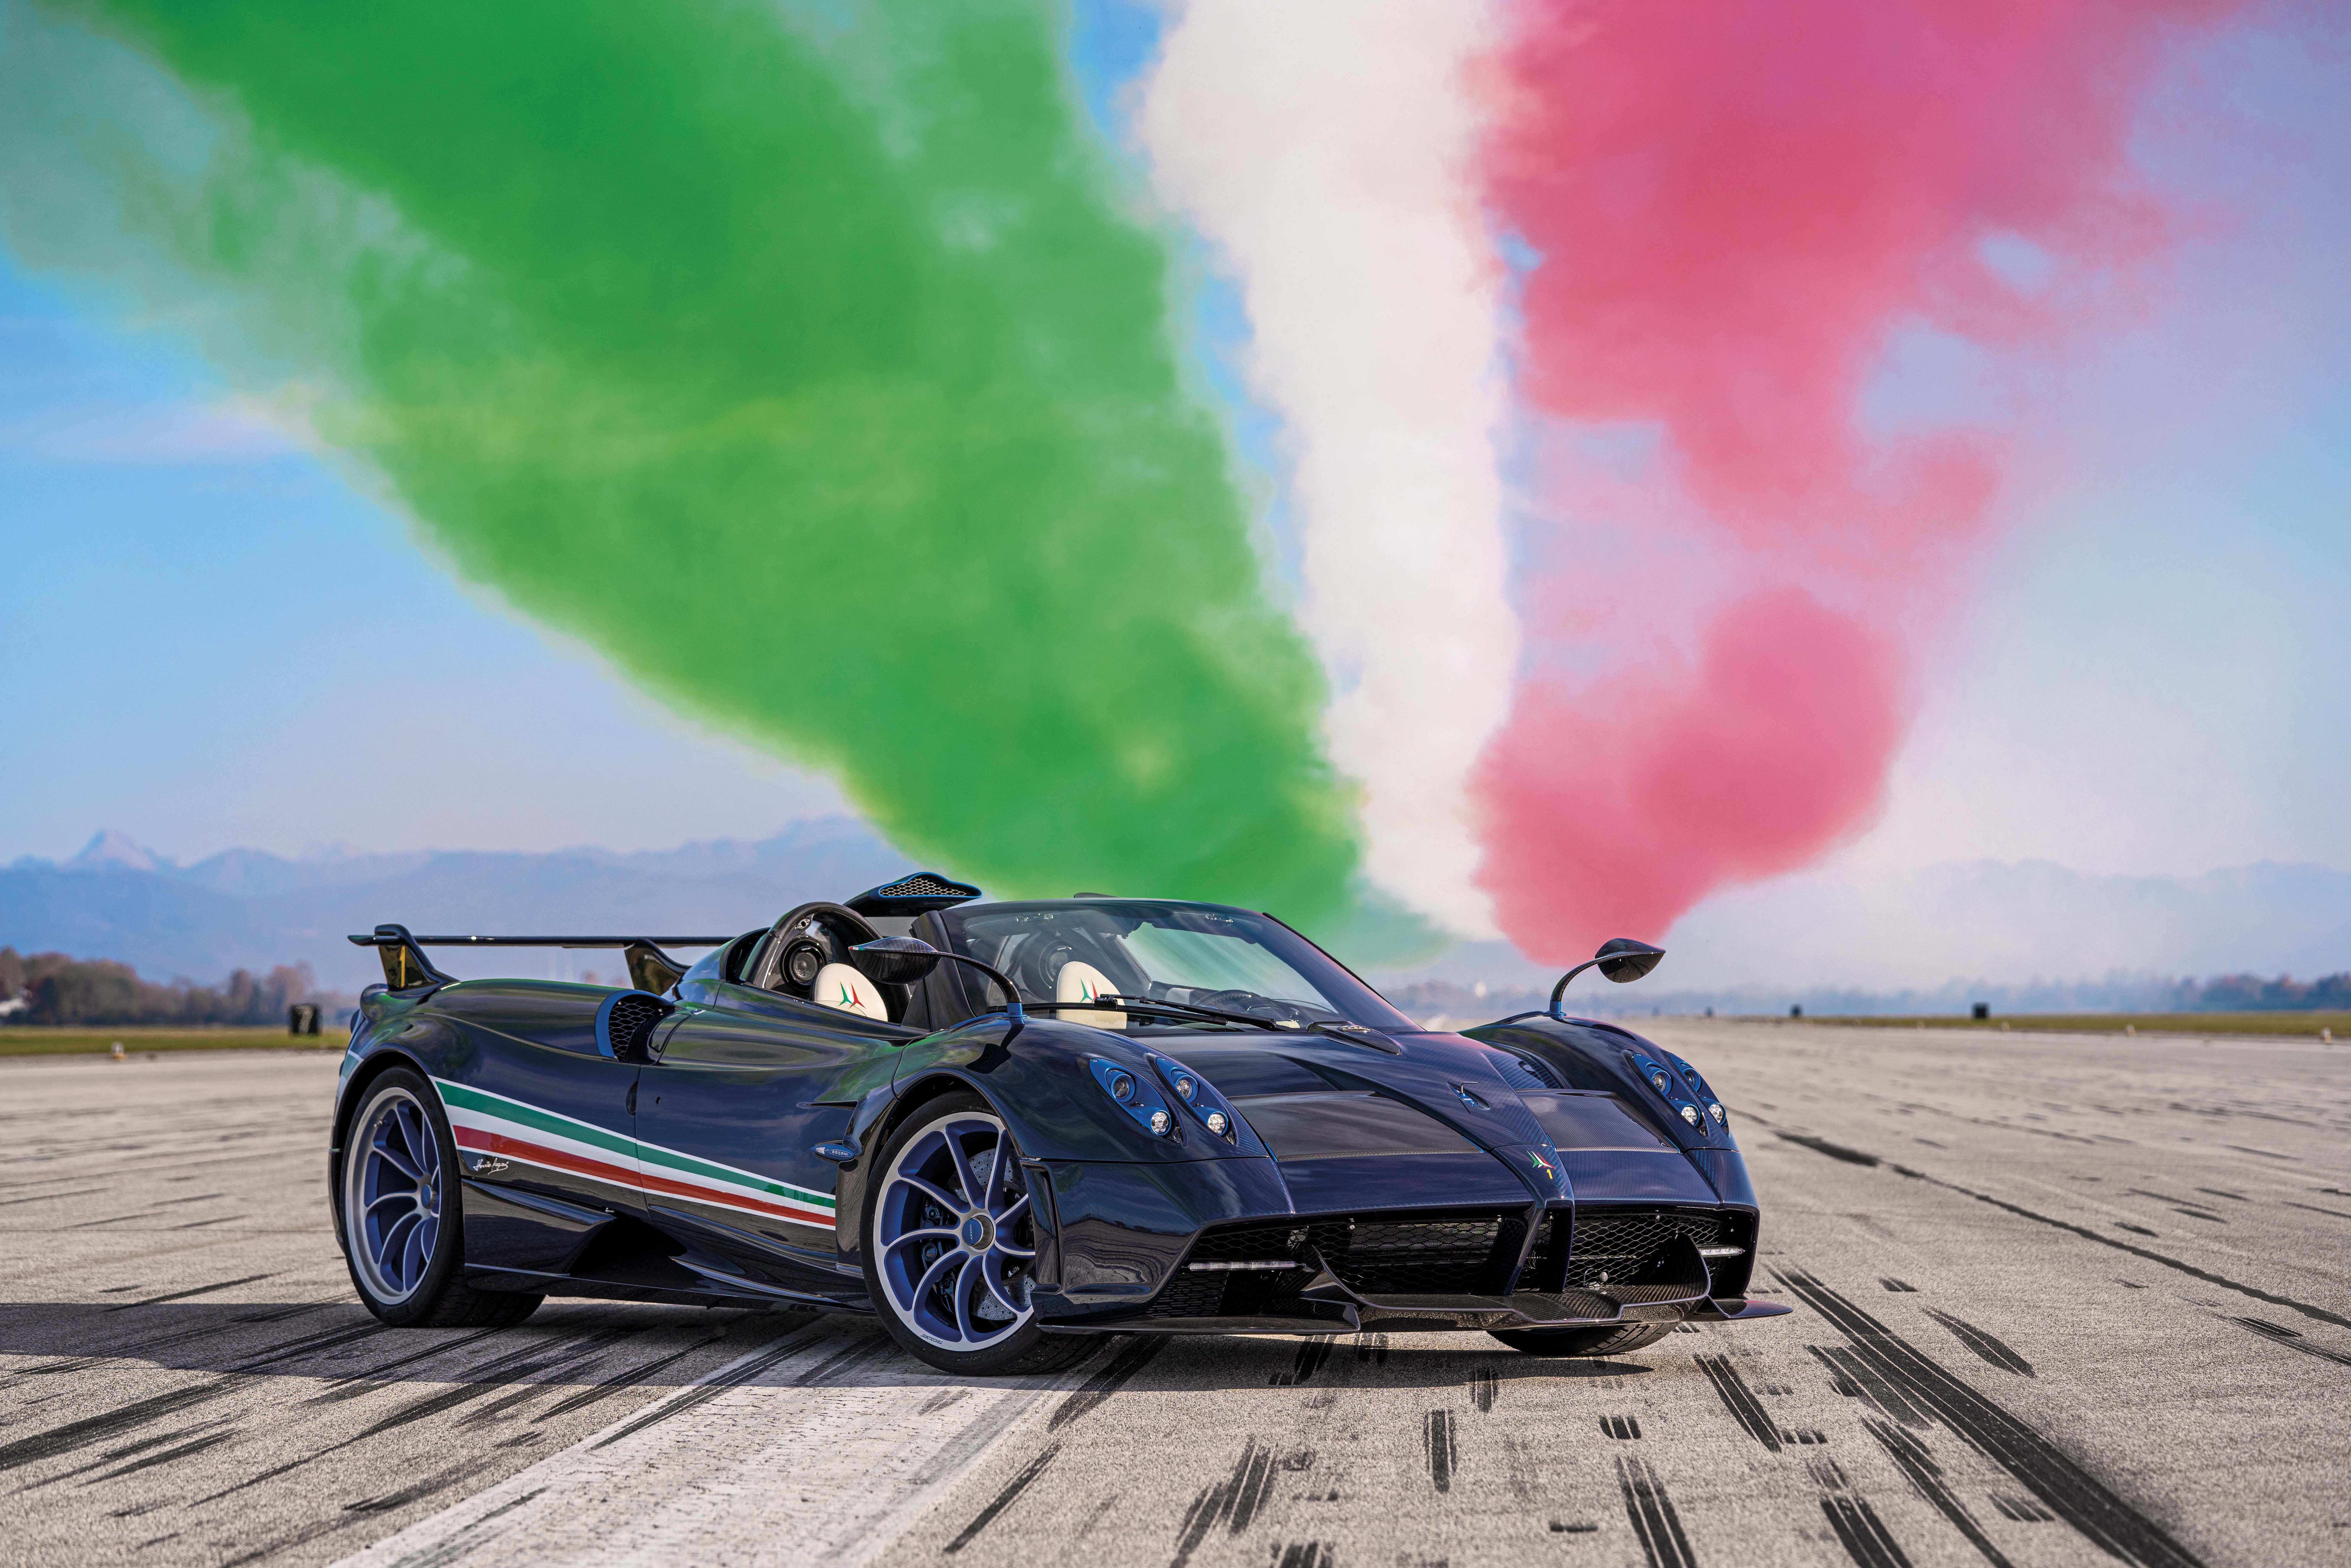 china, electric cars, pagani, pagani is going electric – and china will help